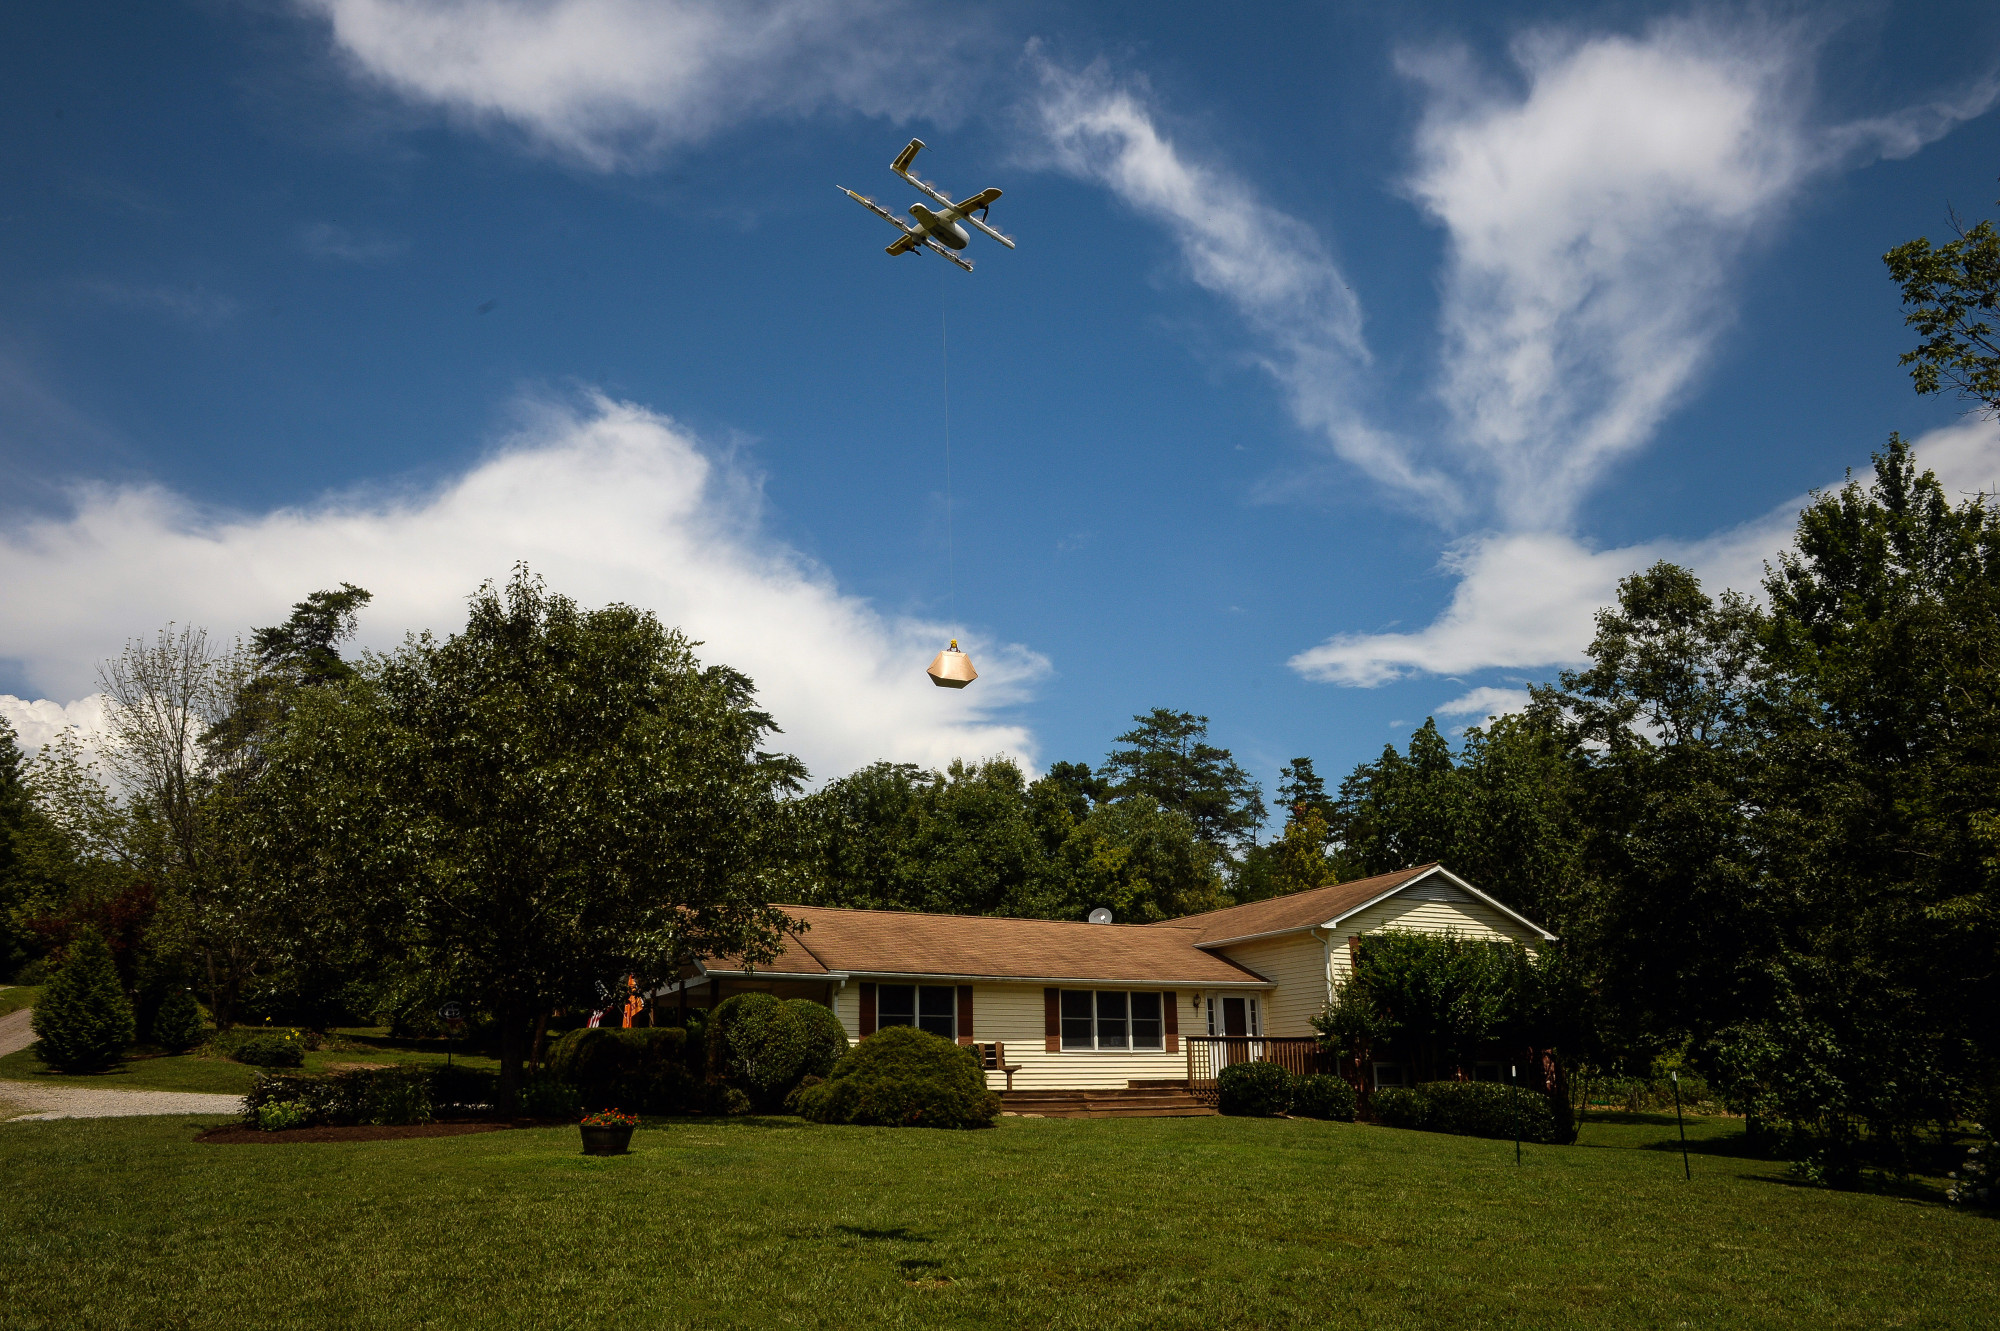 Project Wing conducts example flights of their drone delivery system, in which a remotely operated drone picks up and delivers small packages, in a neighborhood next to the drone test facility at Virginia Tech in Blacksburg, VA, August 07, 2018.
BLOOMBERG/Charles Mostoller